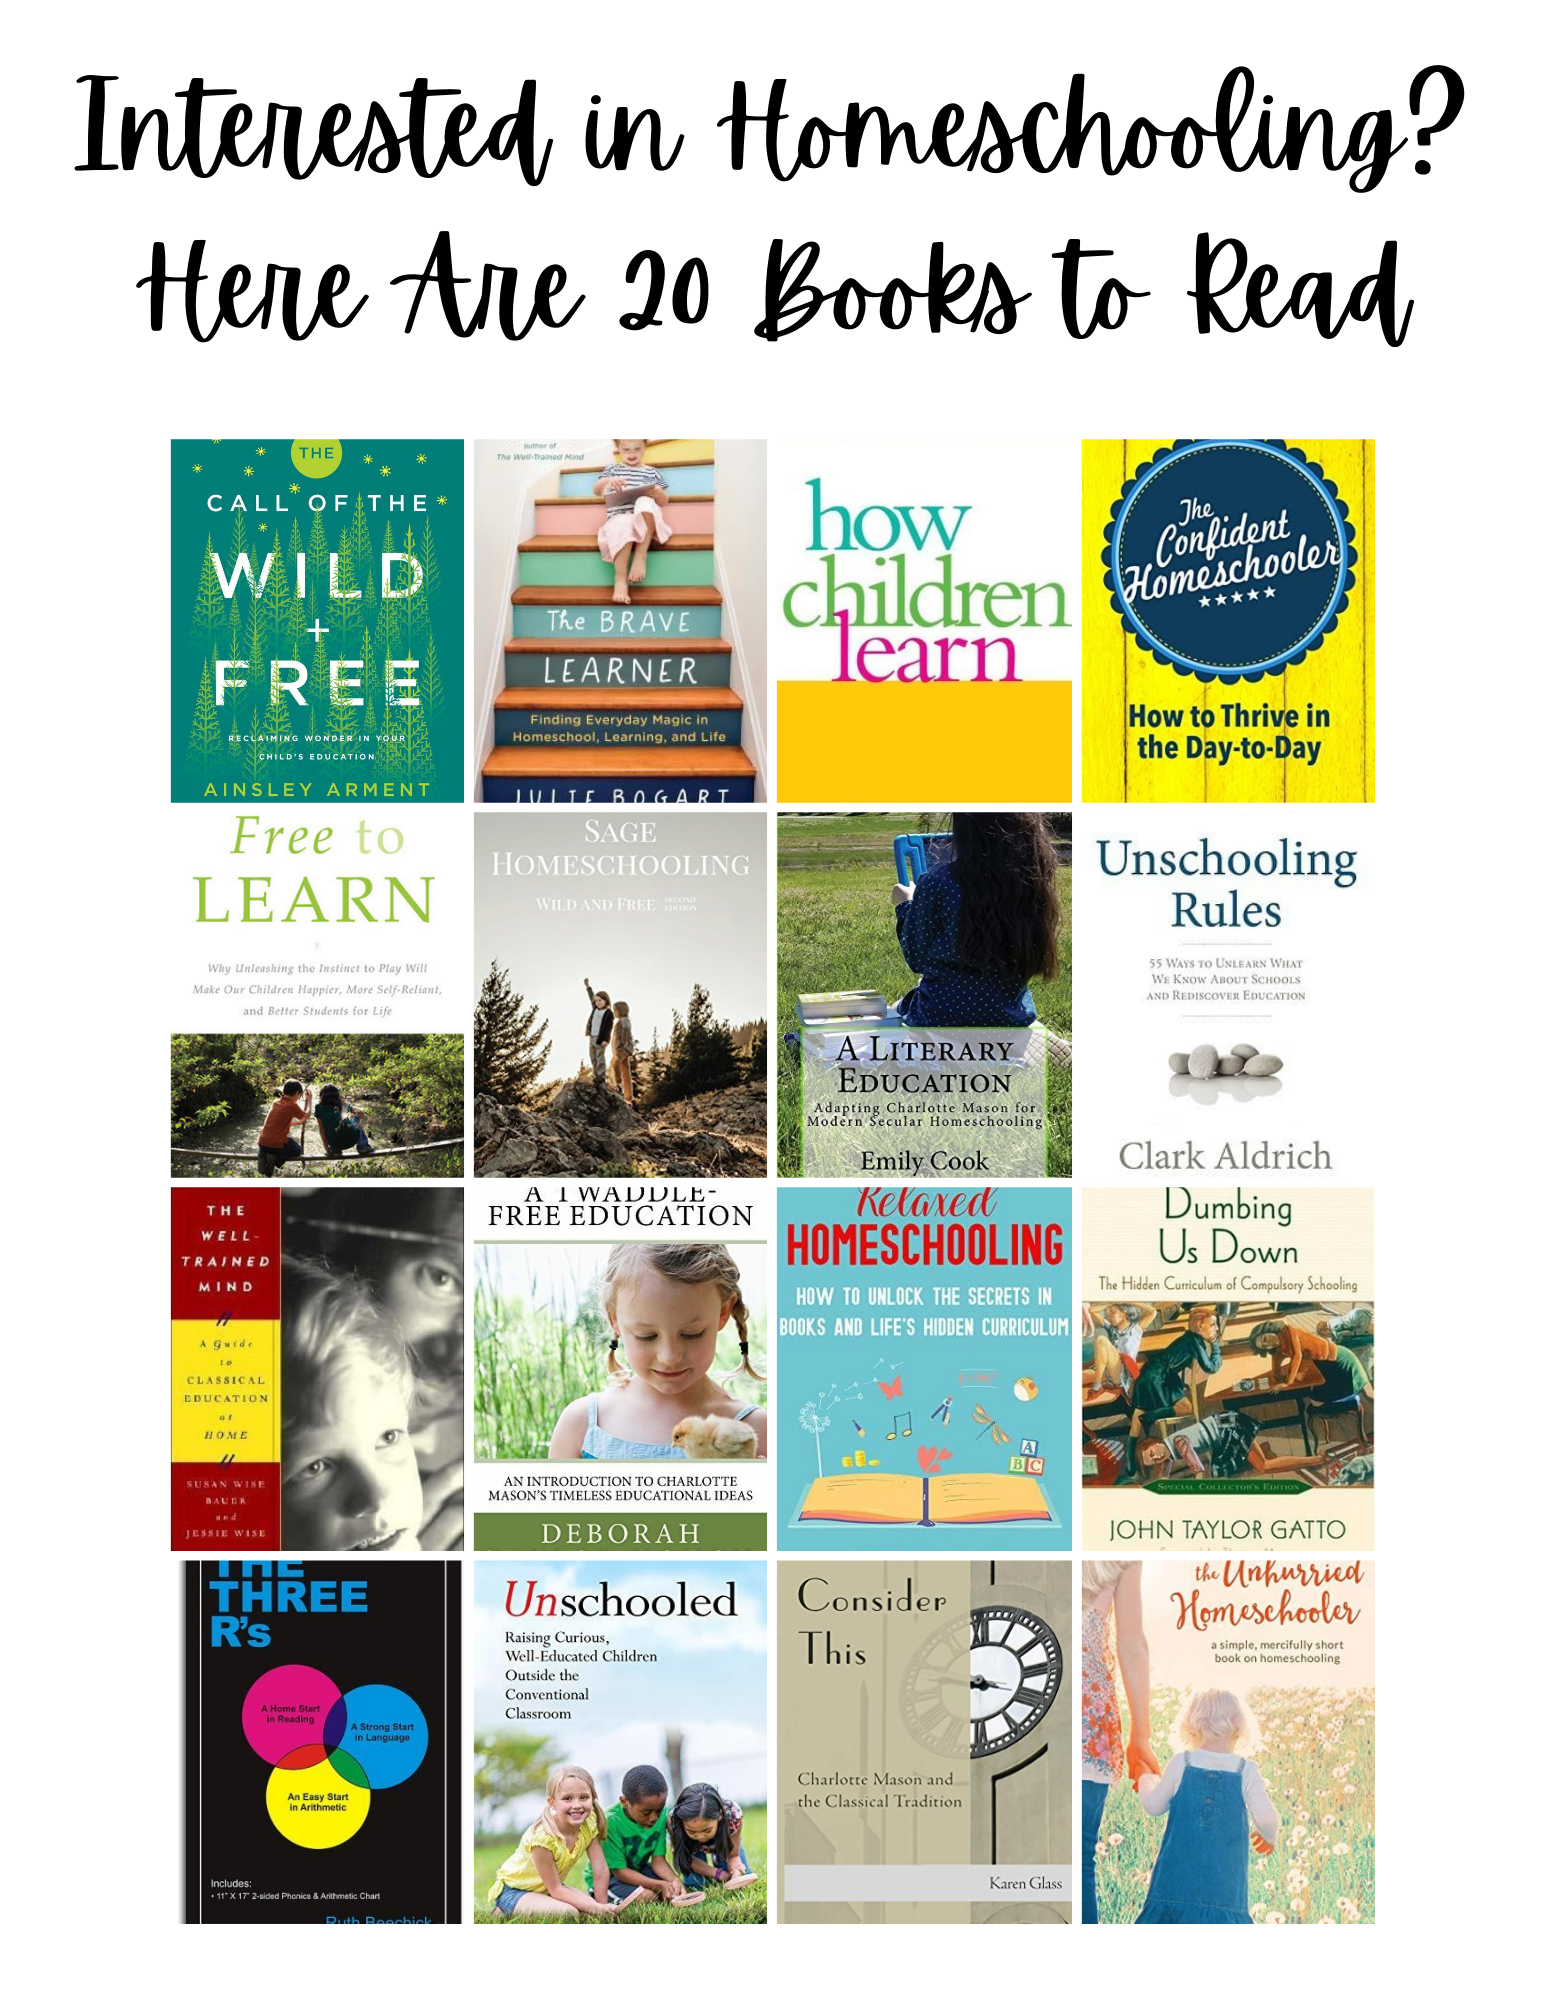 Interested in Homeschooling? Here Are 20 Books to Read